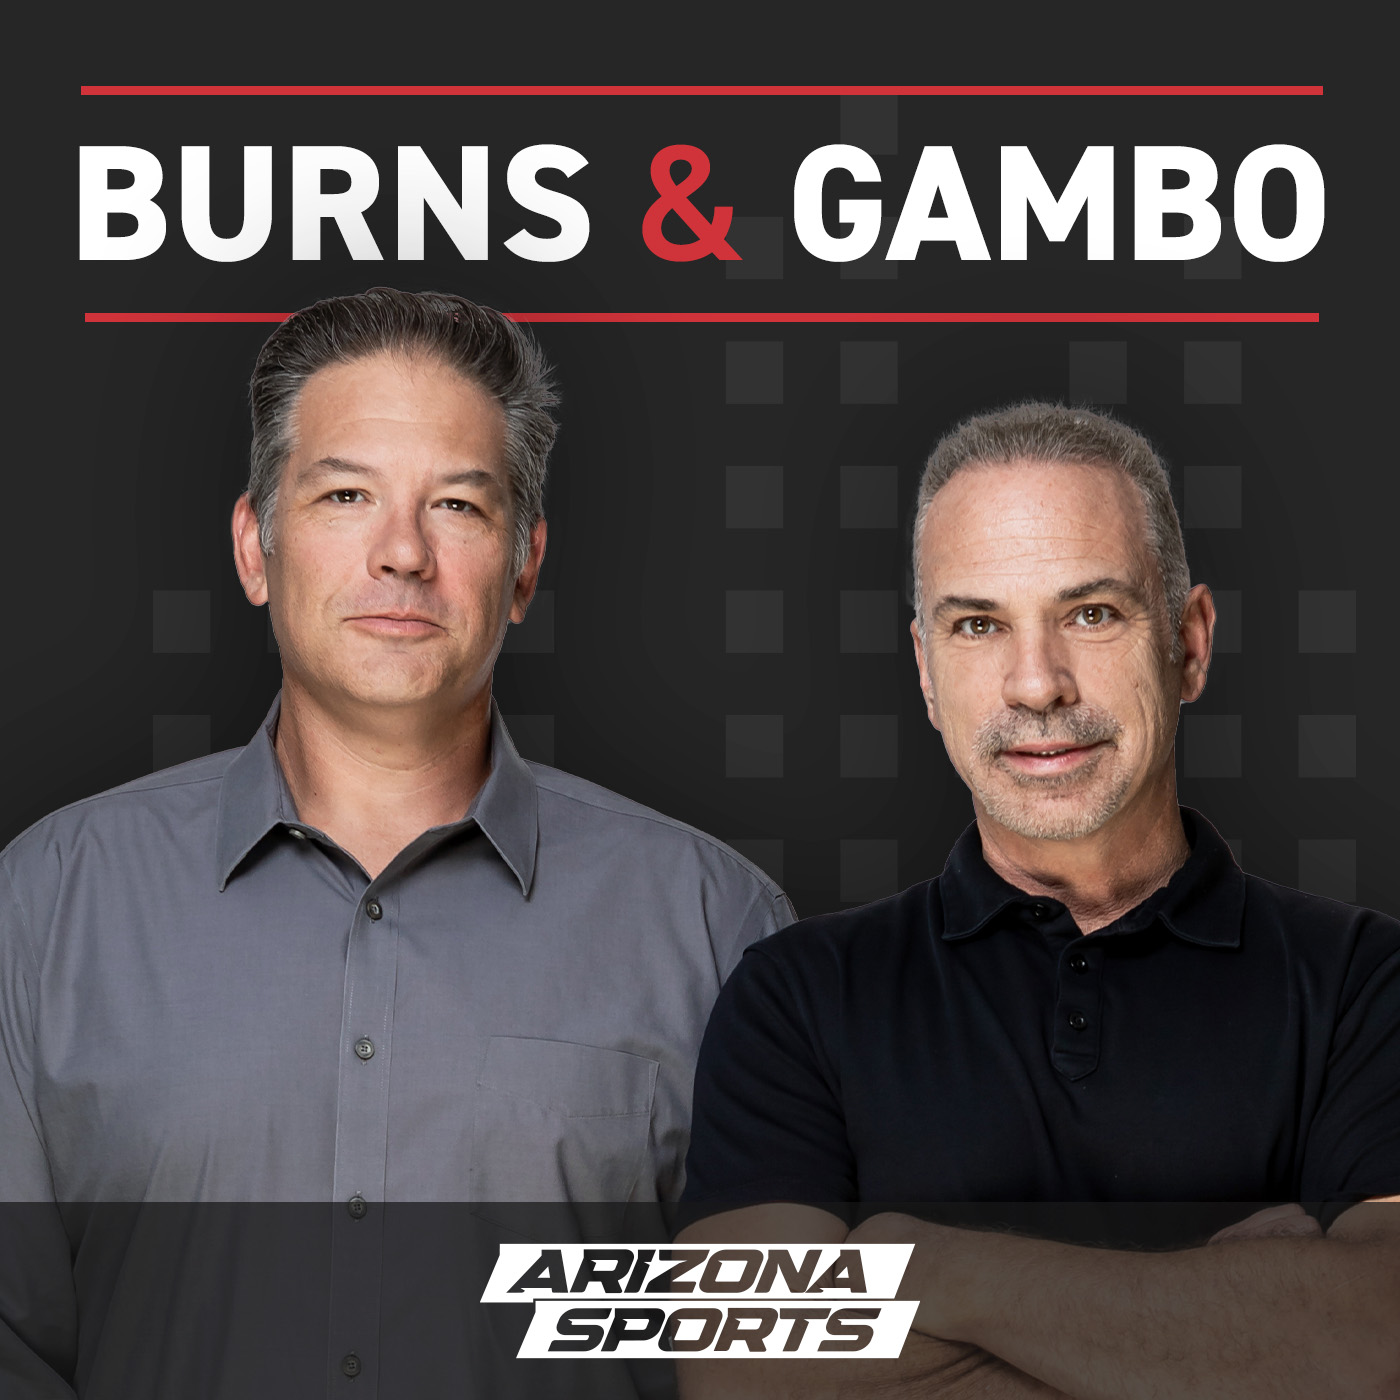 Burns and Gambo ask: What motivated the Diamondbacks' deadline moves?